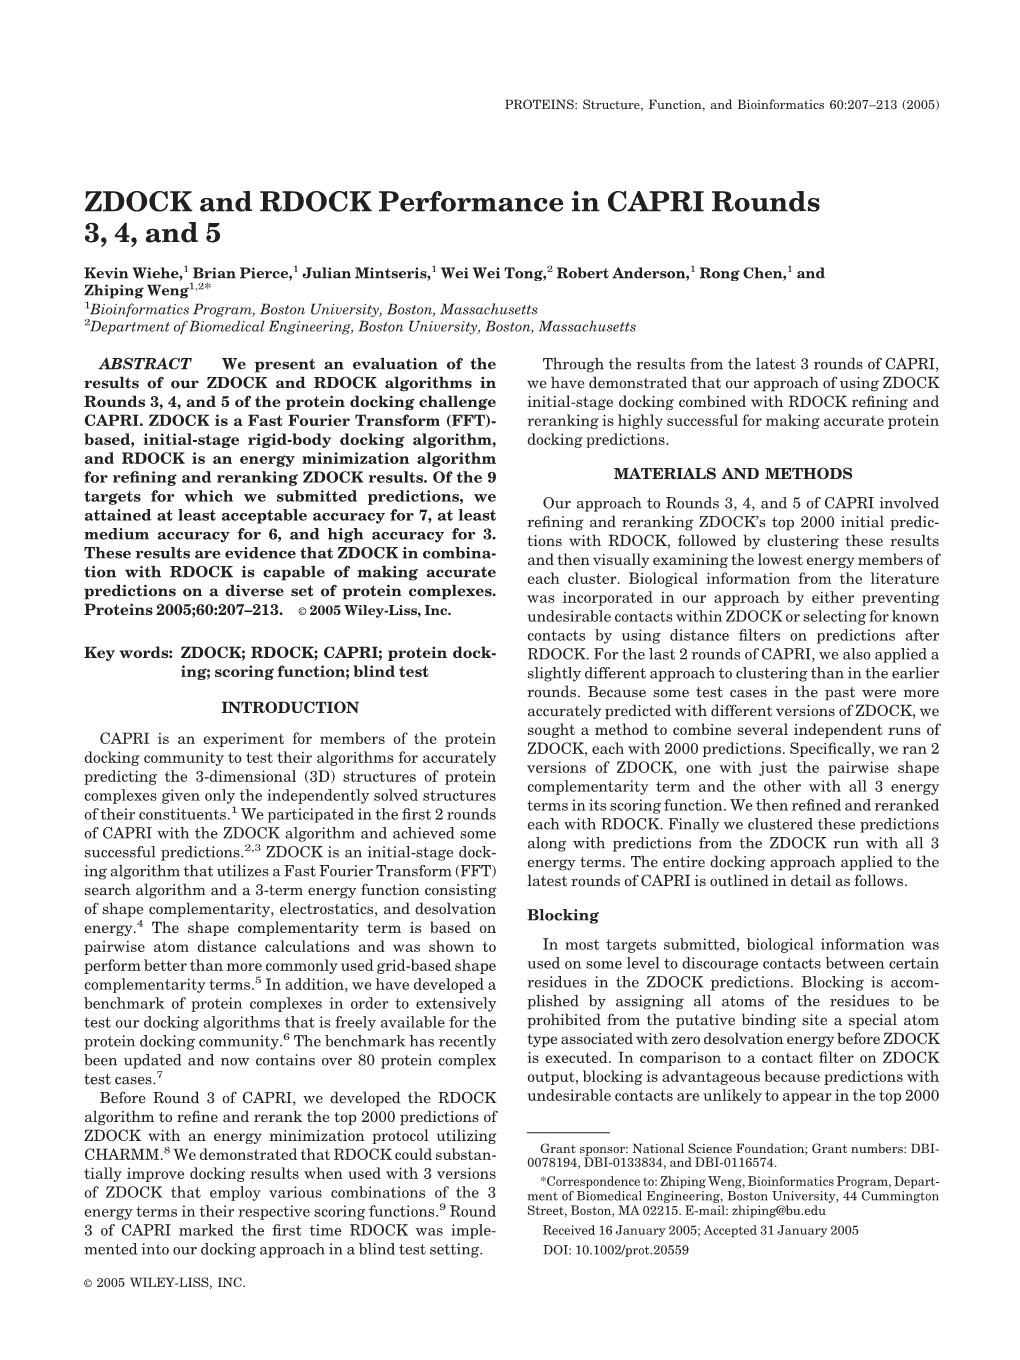 ZDOCK and RDOCK Performance in CAPRI Rounds 3, 4, and 5